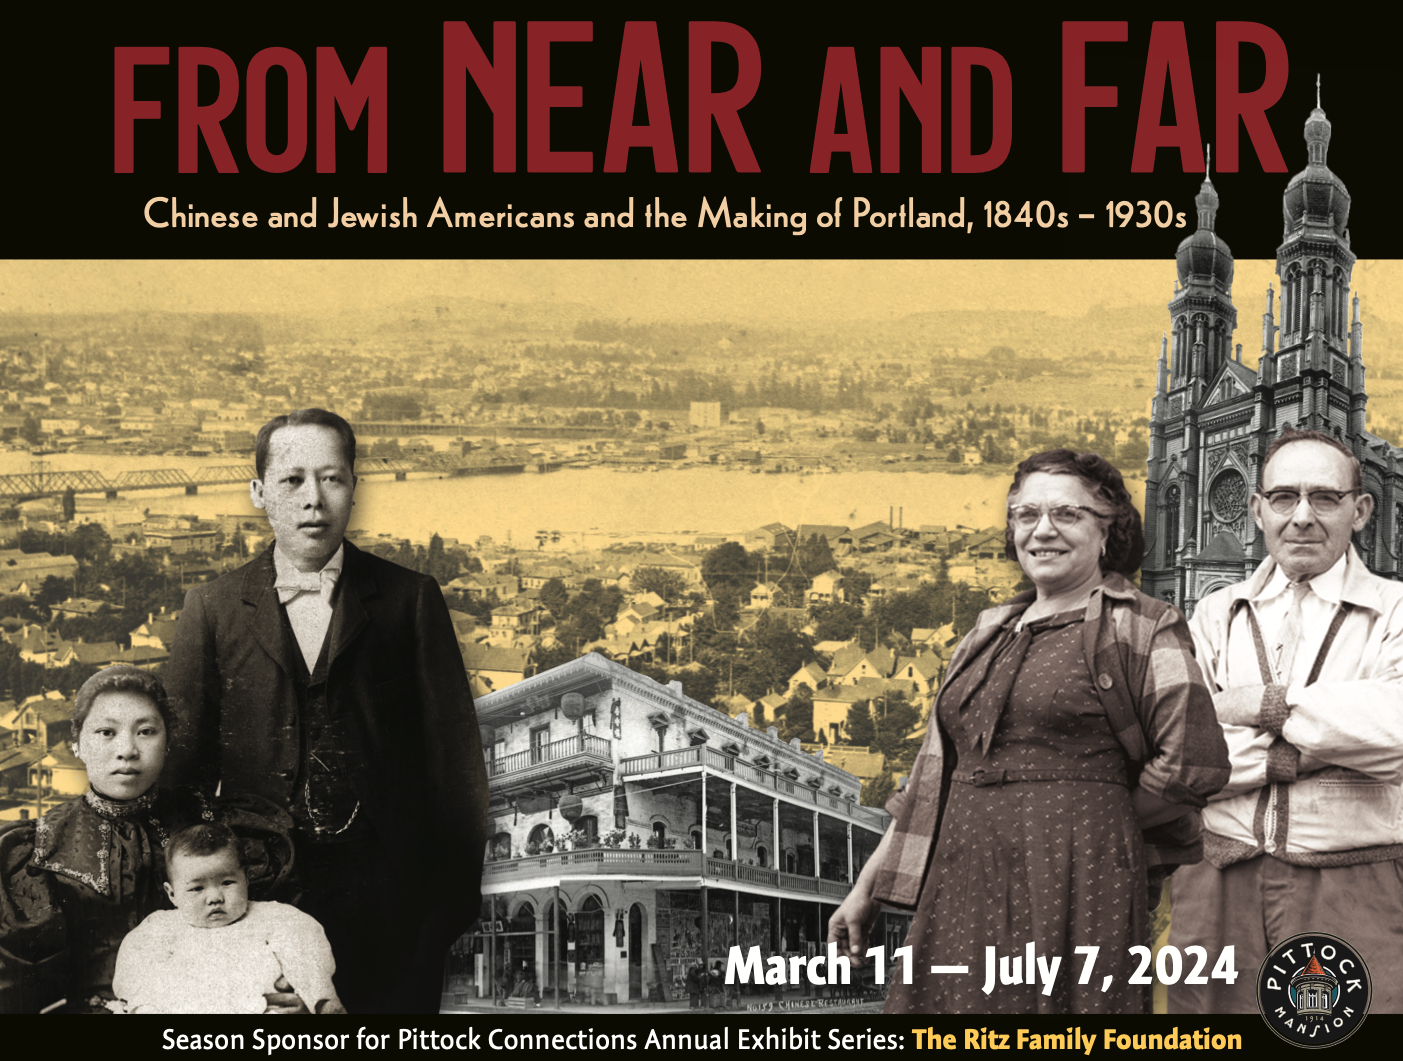 From Near and Far - Chinese and Jewish Americans and the making of Portland. An exhibit at Portland's Pittock Mansion from March 11 - July 7th.